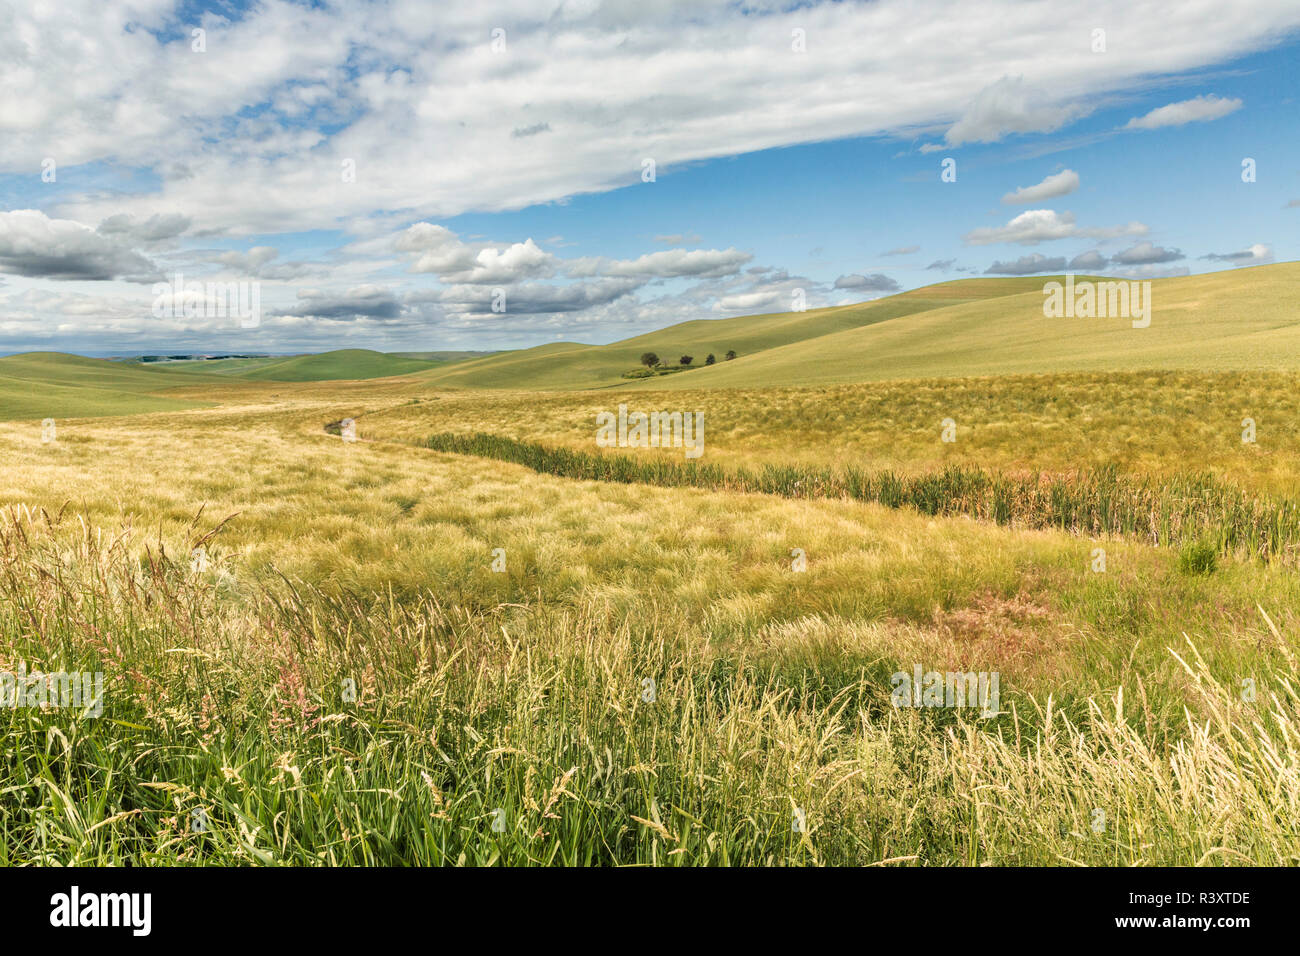 Expansive rolling fields of wheat and clouds, Palouse region of western Idaho. Stock Photo